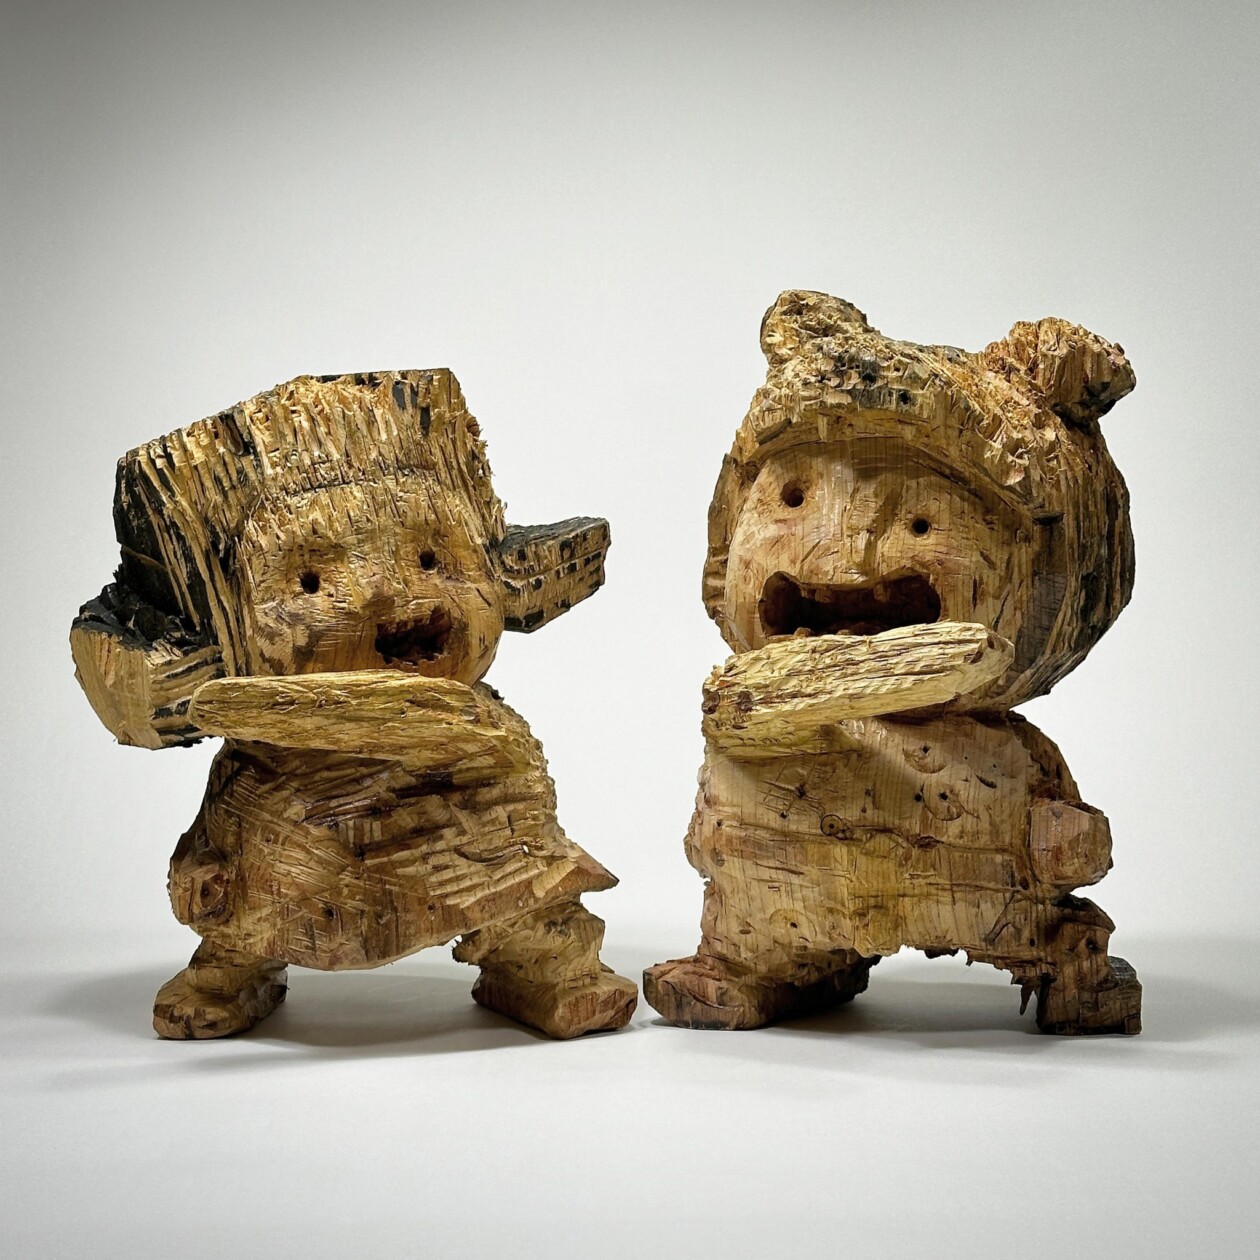 The Enchanting World Of Hirosuke Yabe's Wooden Beings (5)